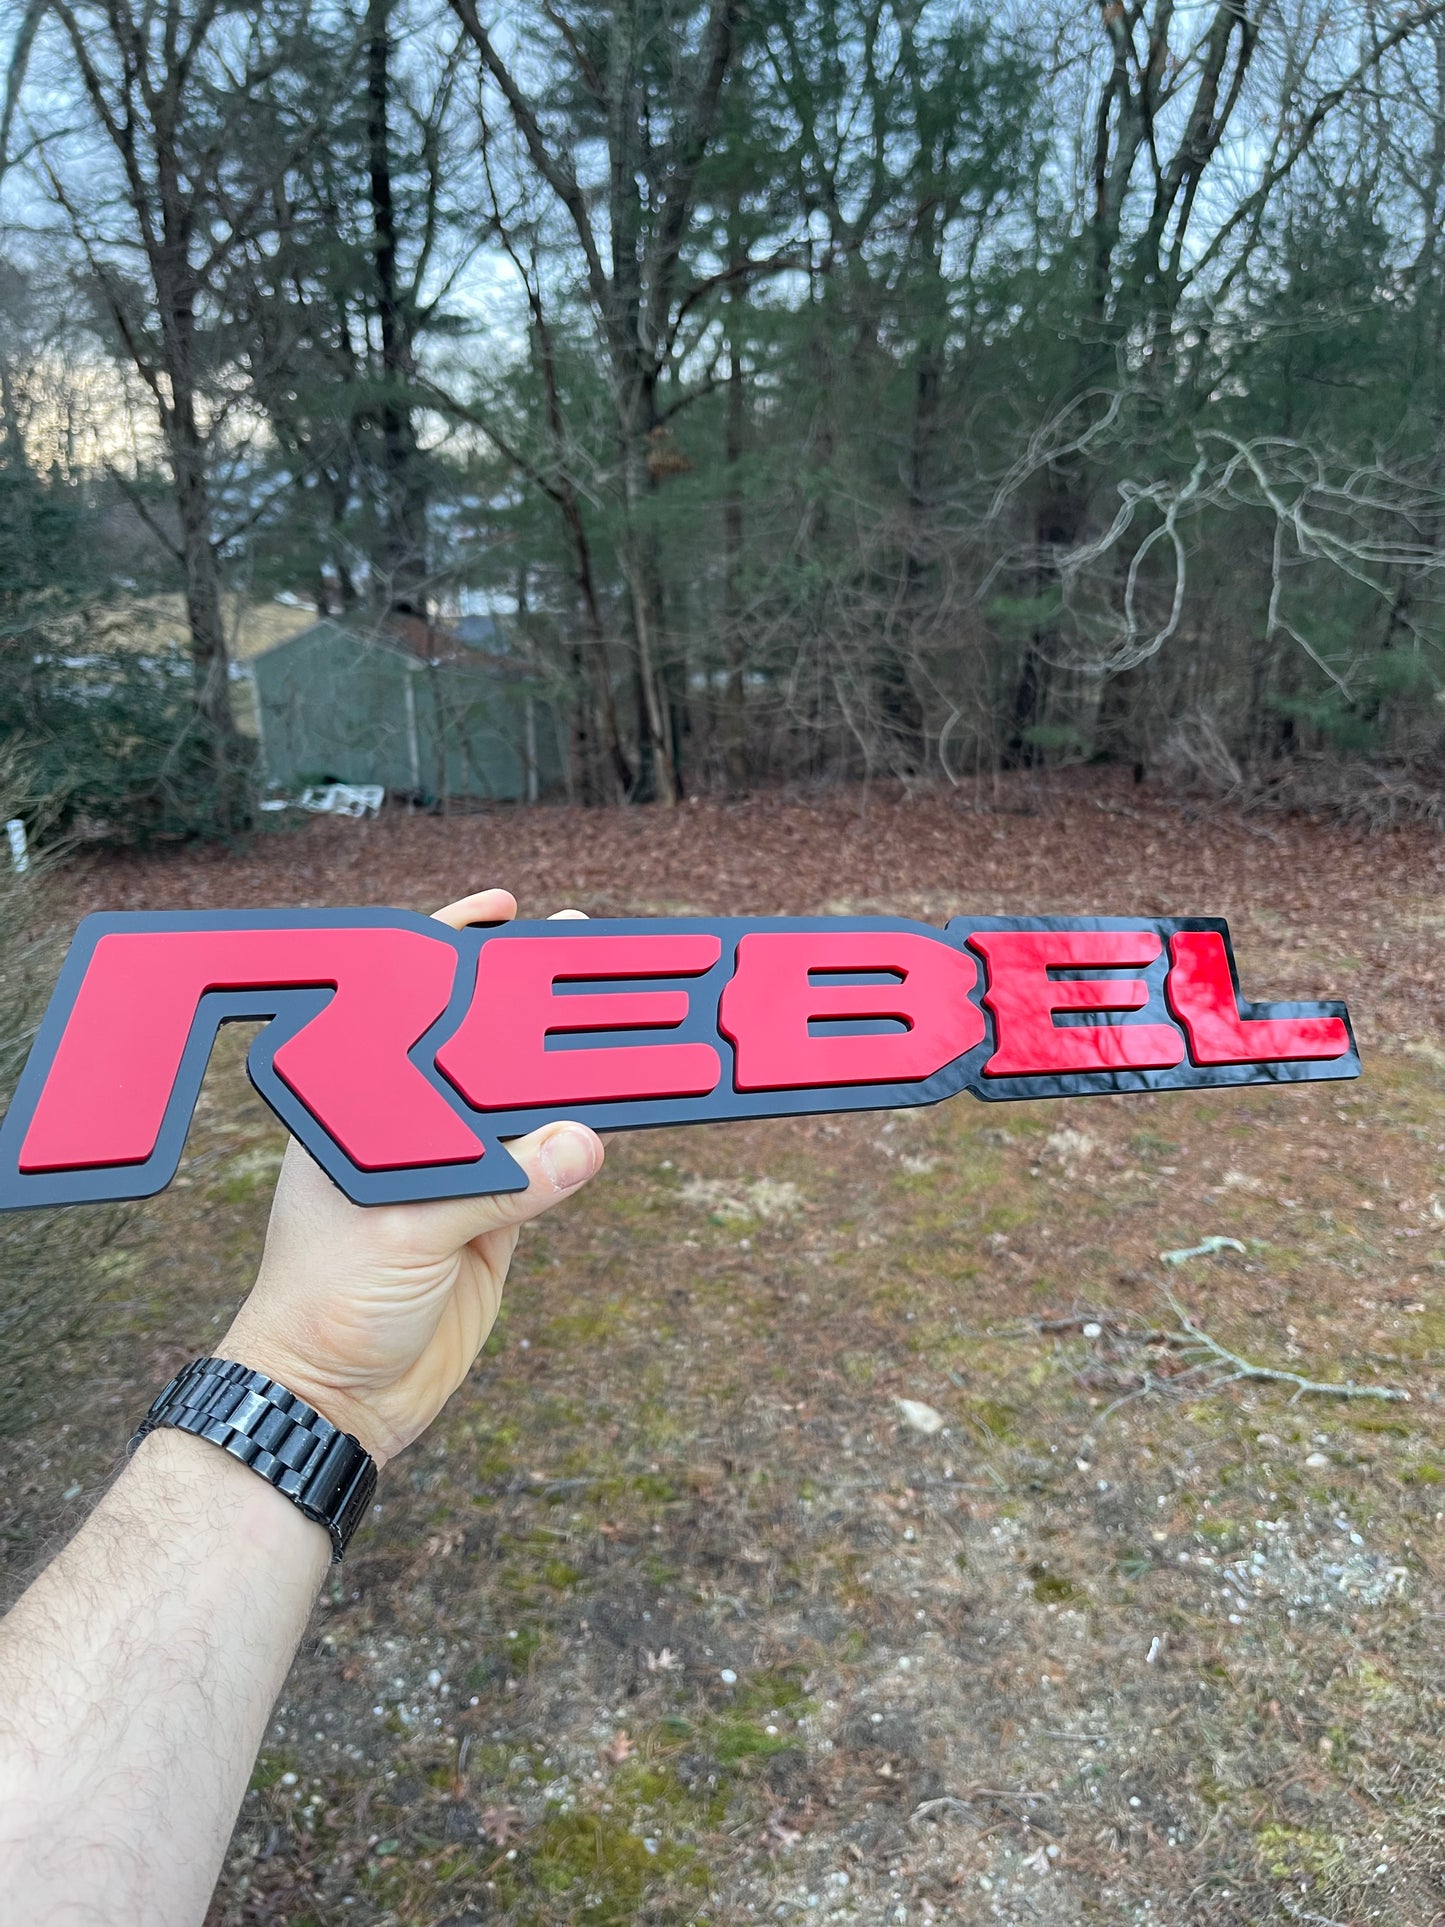 Rebel Grille badge replacement